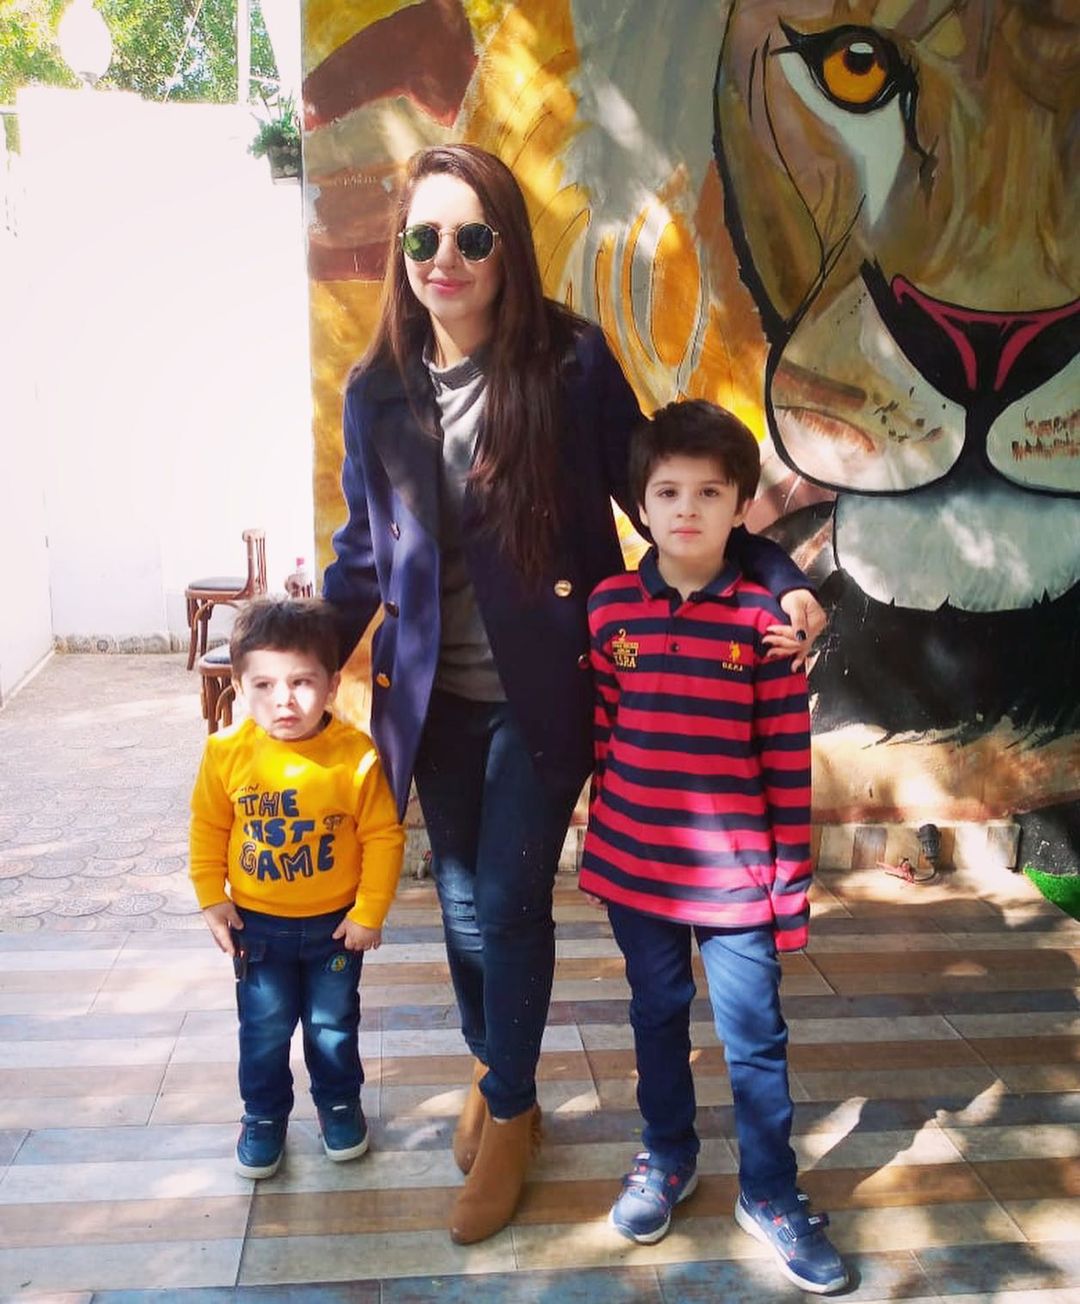 Kanwar Arsalan and Fatima Effendi with Family - New Pictures